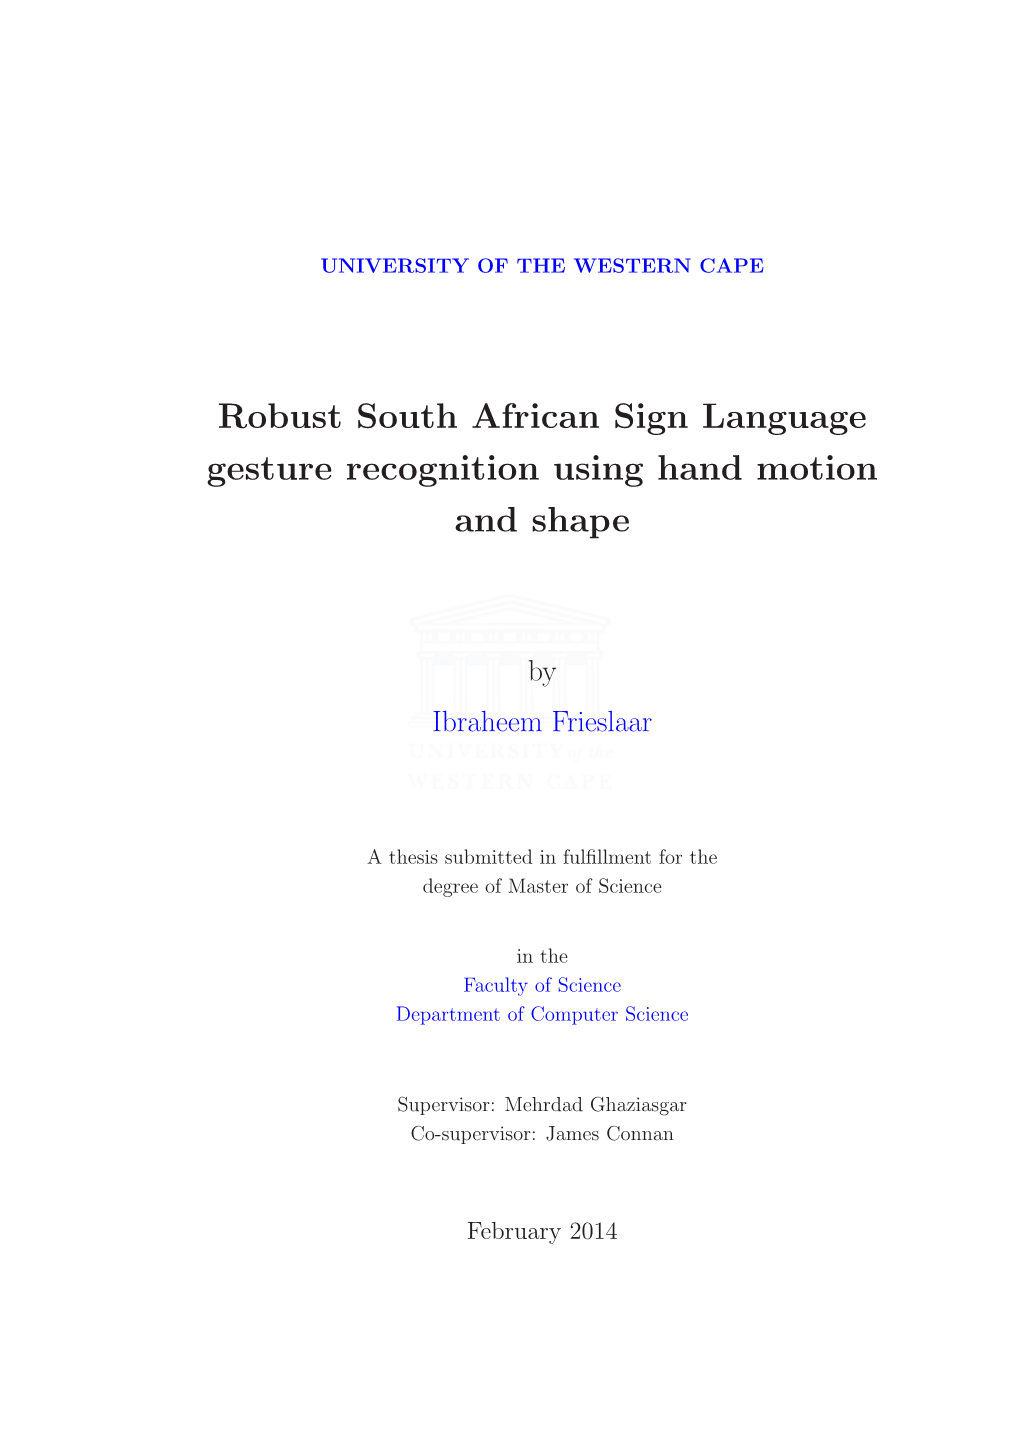 Robust South African Sign Language Gesture Recognition Using Hand Motion and Shape